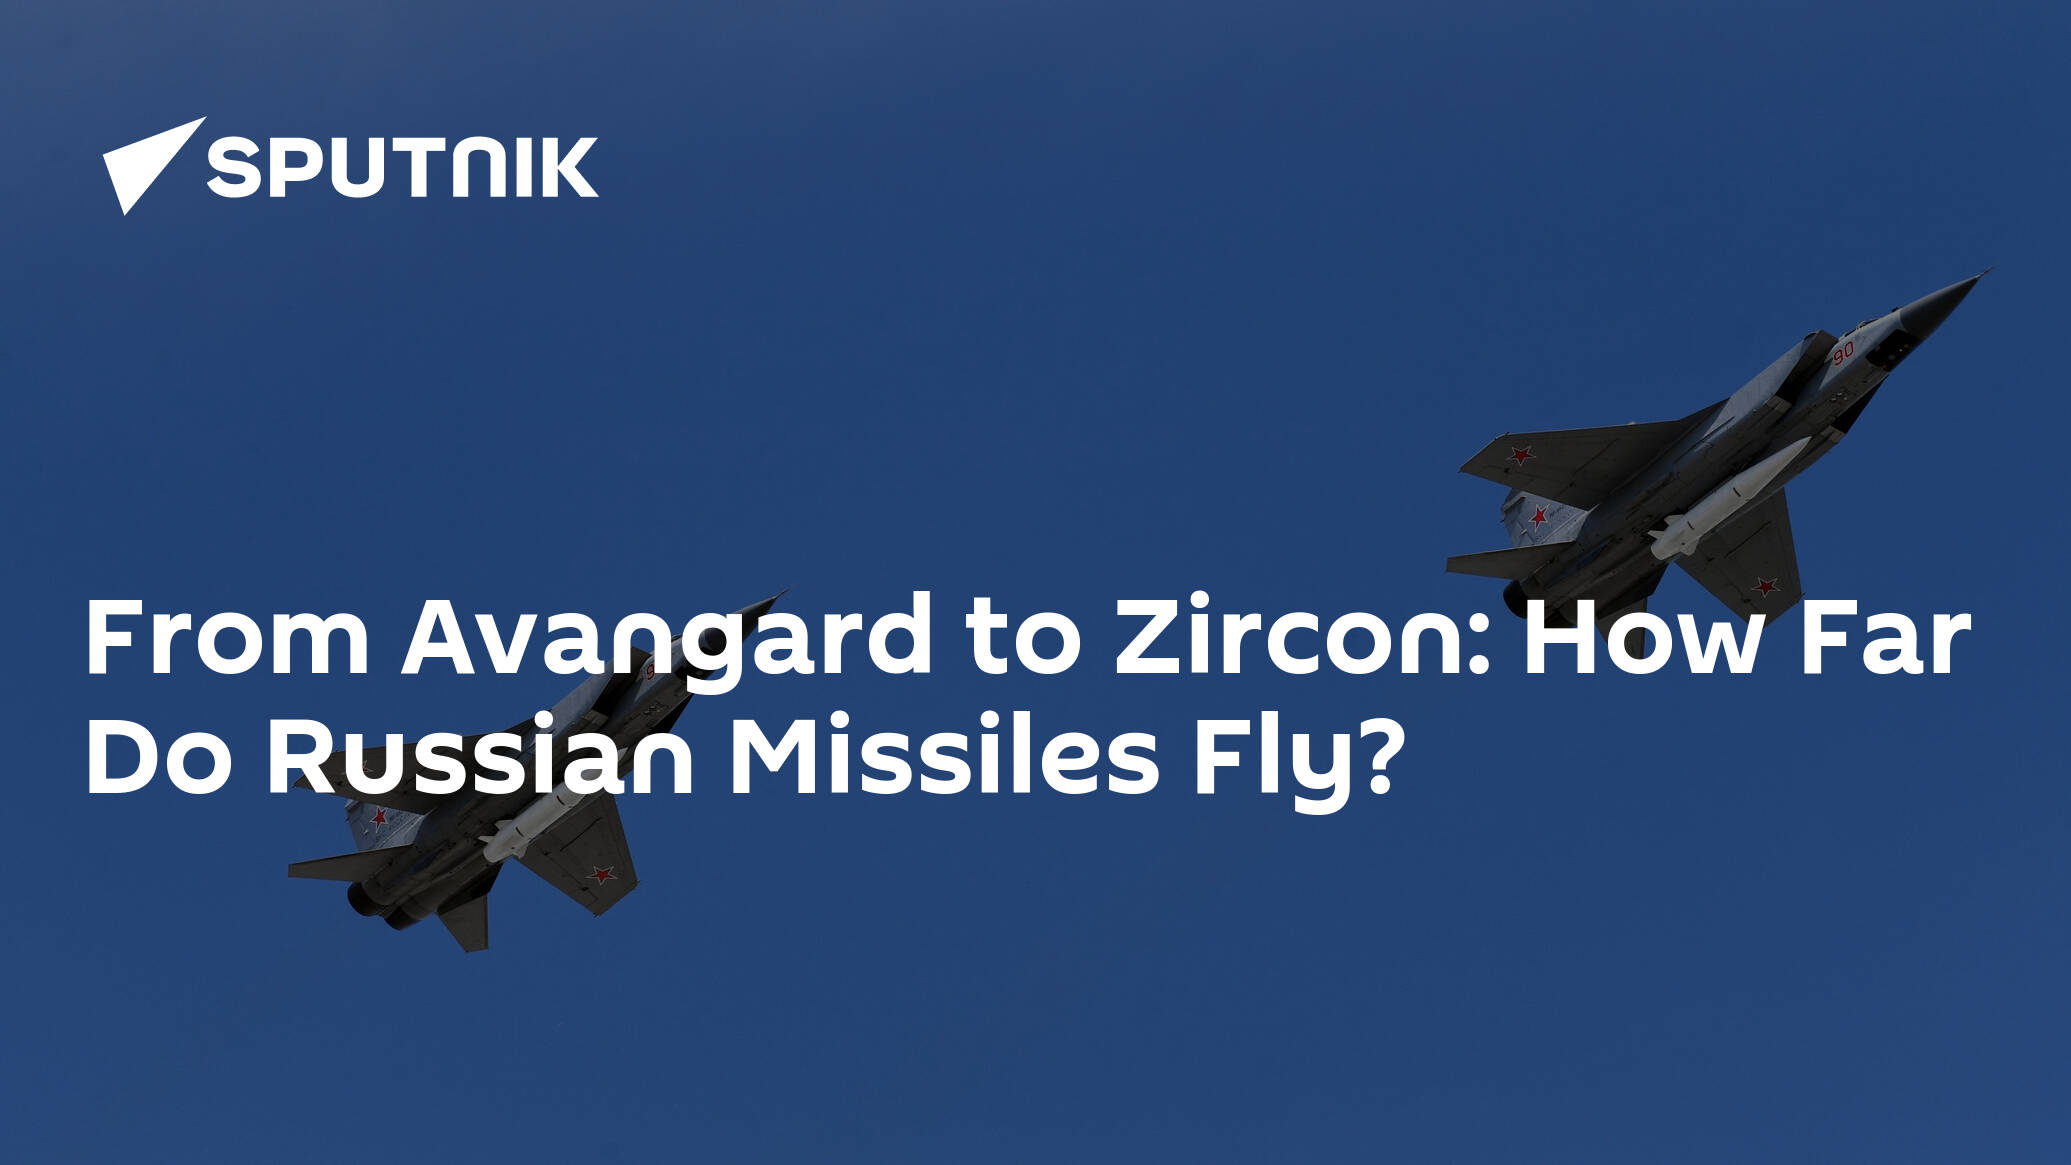 From Avangard to Zircon: How Far Do Russian Missiles Fly?